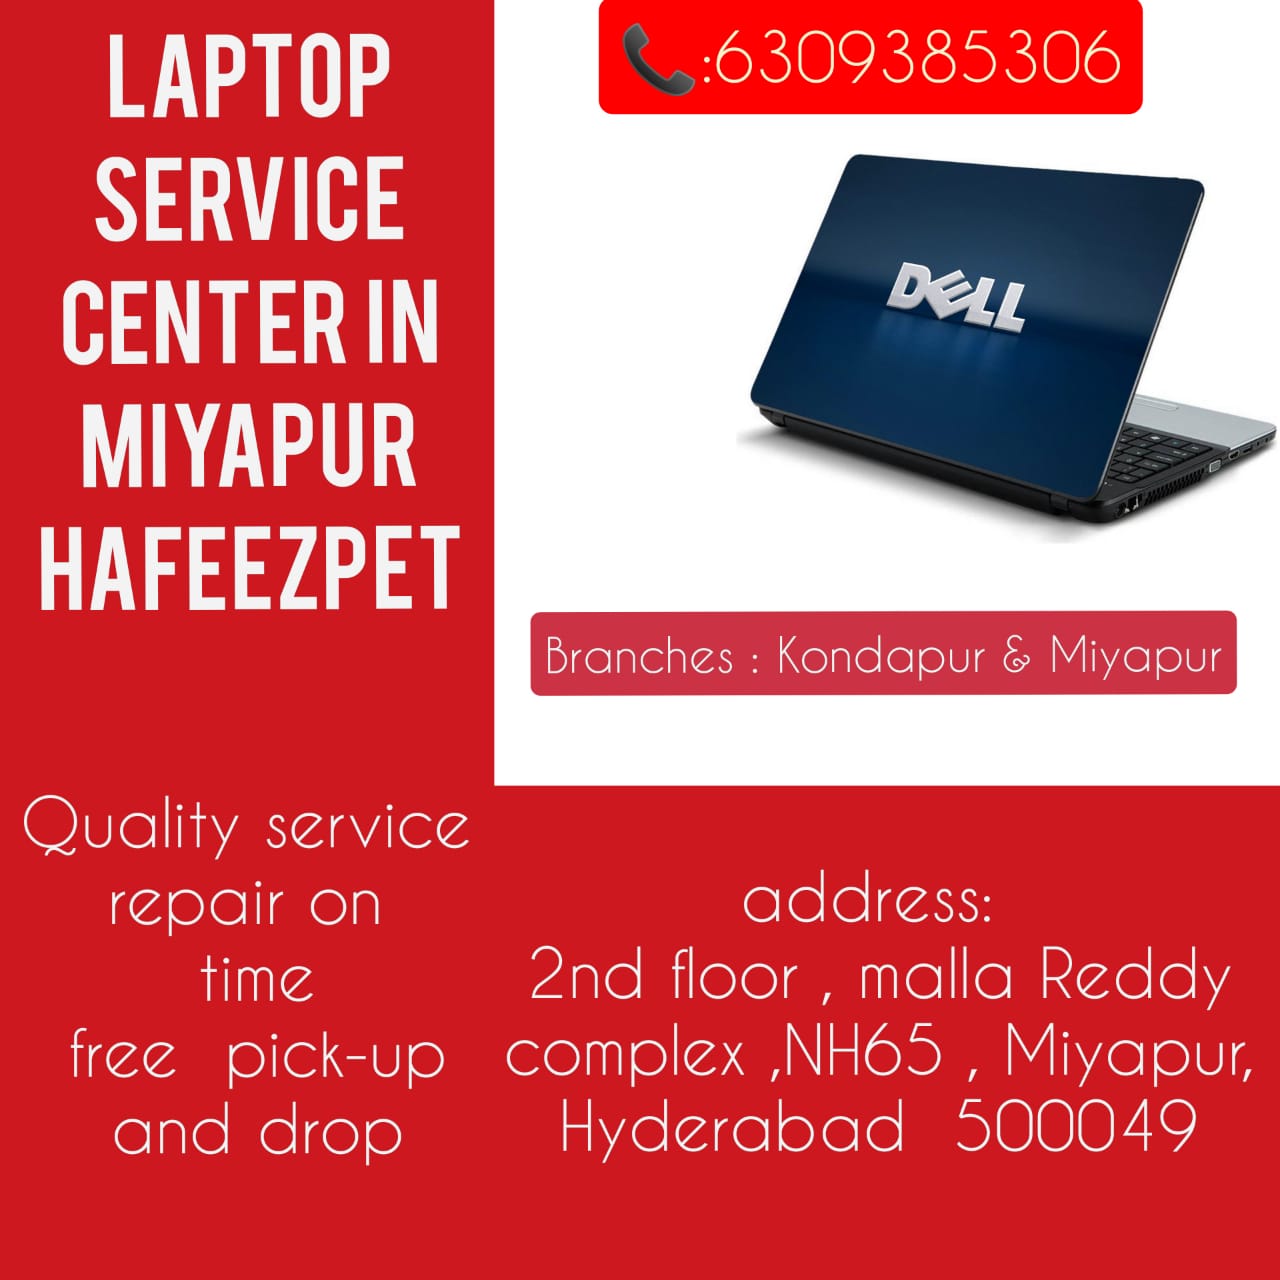 Dell Laptop Service Center In Hyderabad